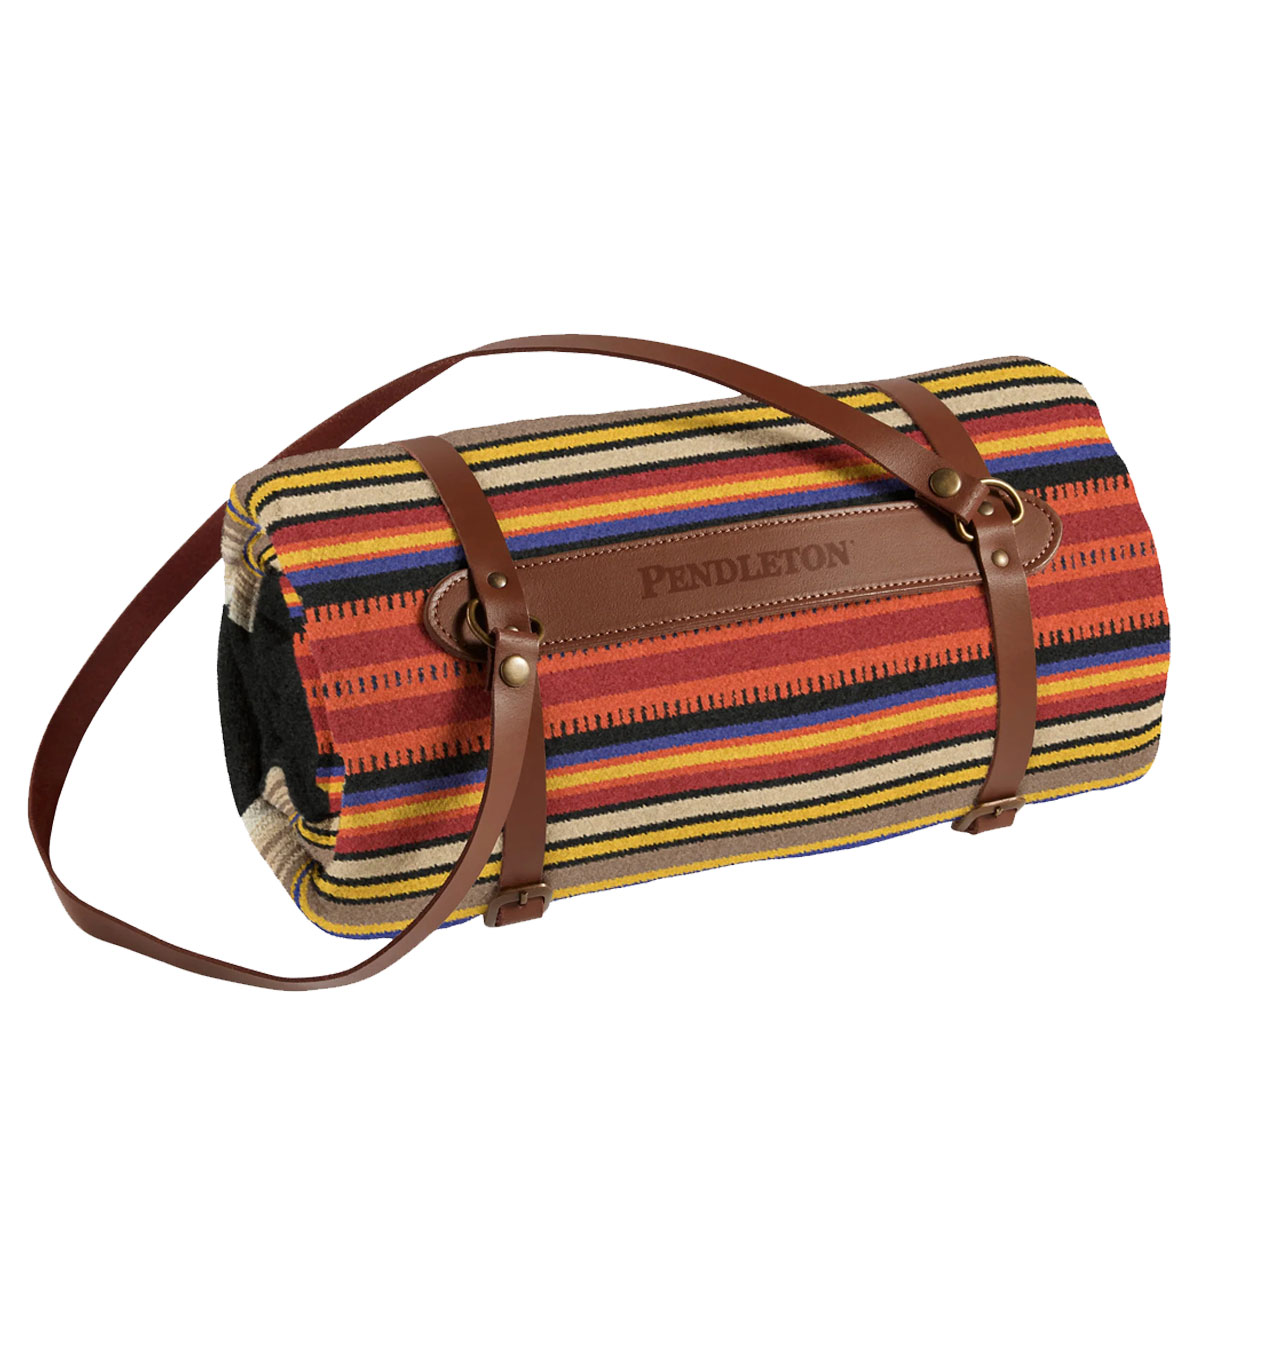 Pendleton---Acadia-National-Park-Throw-Blanket-With-Carrier1